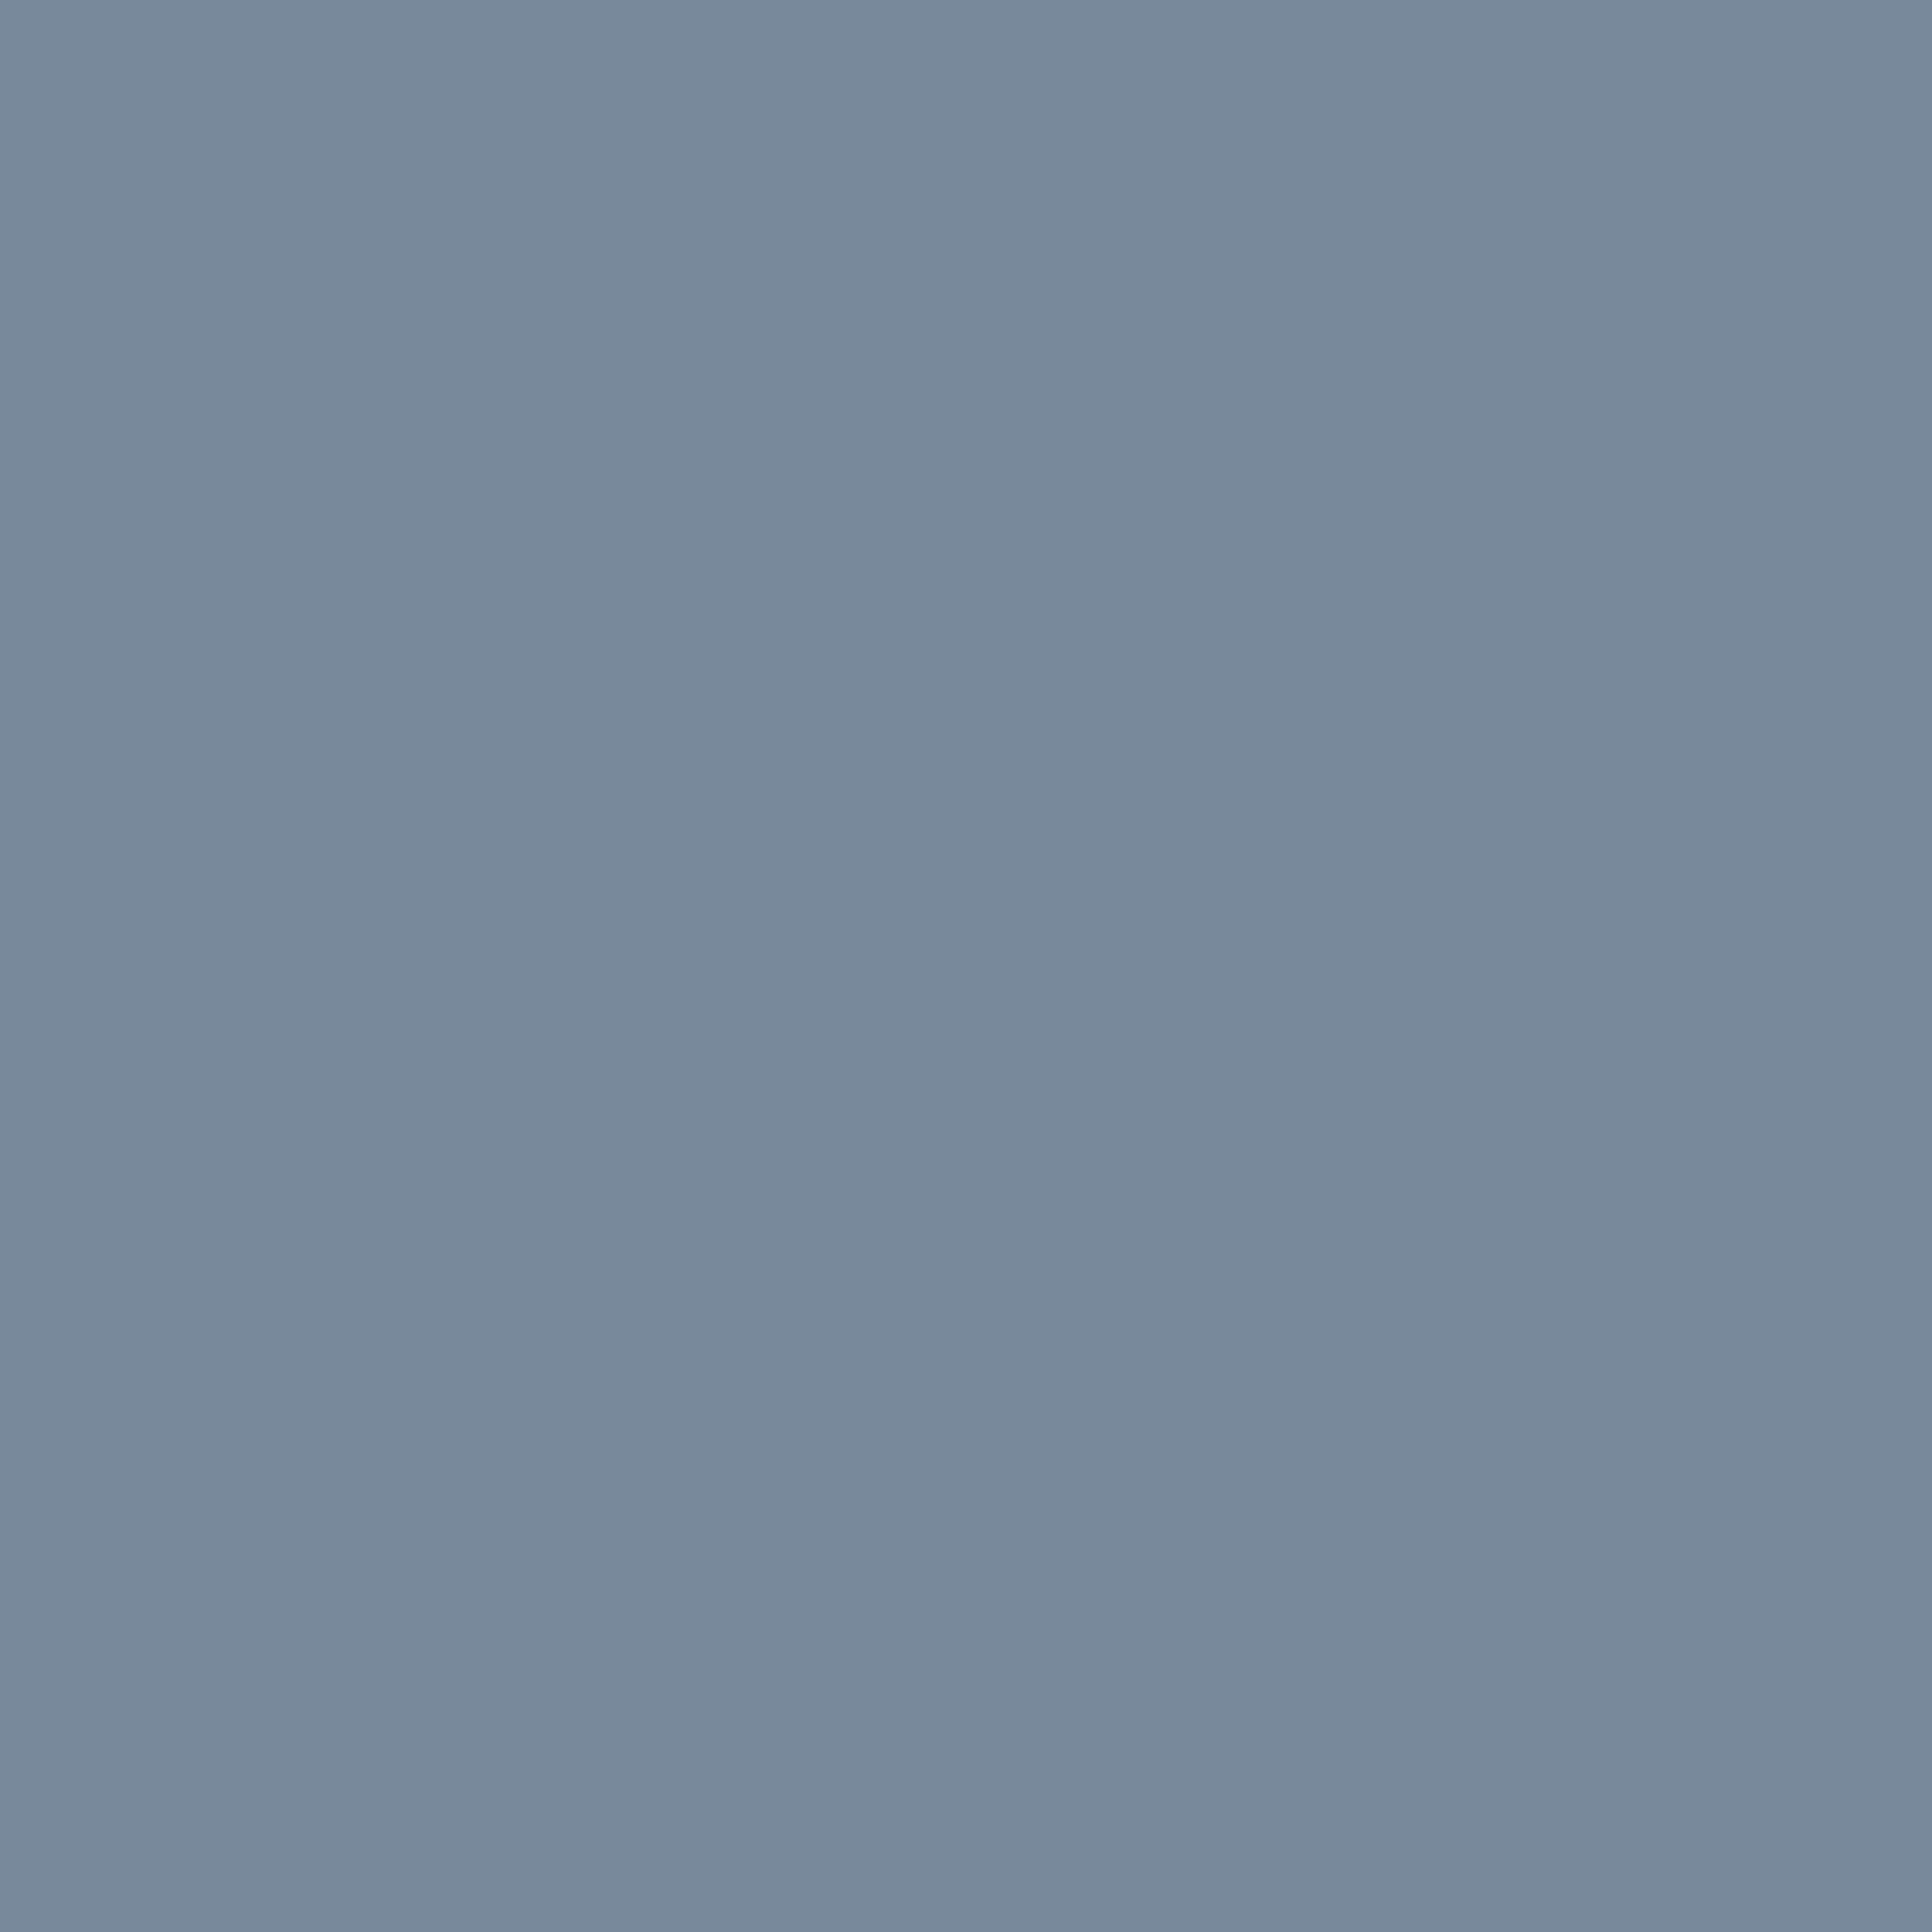 2732x2732 Light Slate Gray Solid Color Background